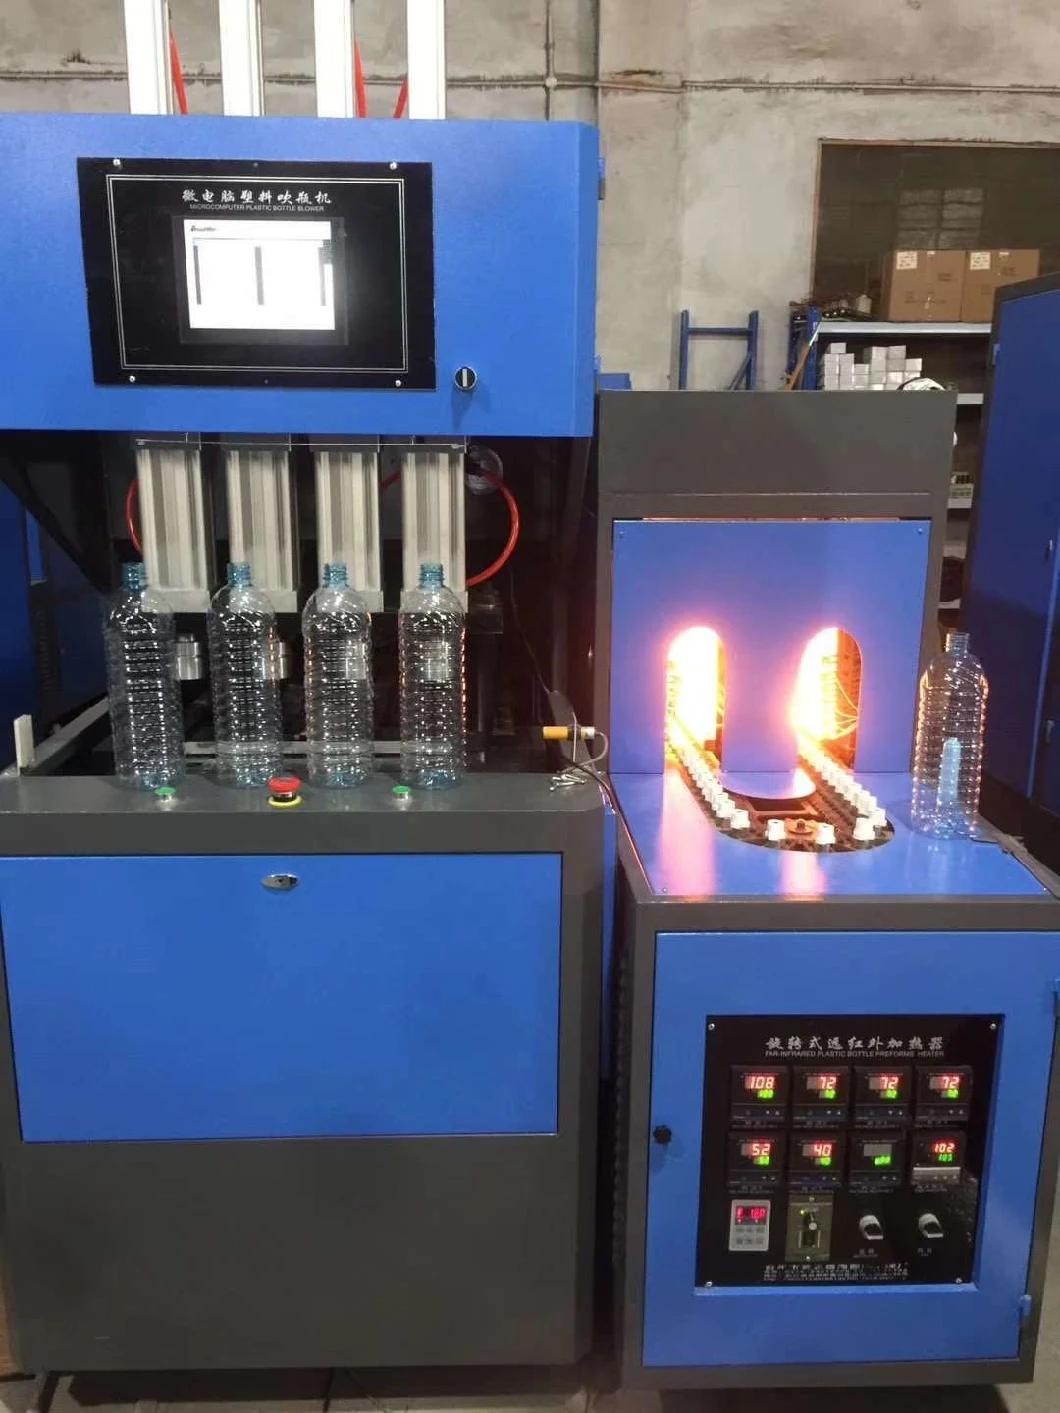 4 Cavities Semiautomatic Blow/Blowing Moulding/Molding Machine/Plastic Machine/Water Machine/Plastic Injection Molding Machine for Making Pet Bottles